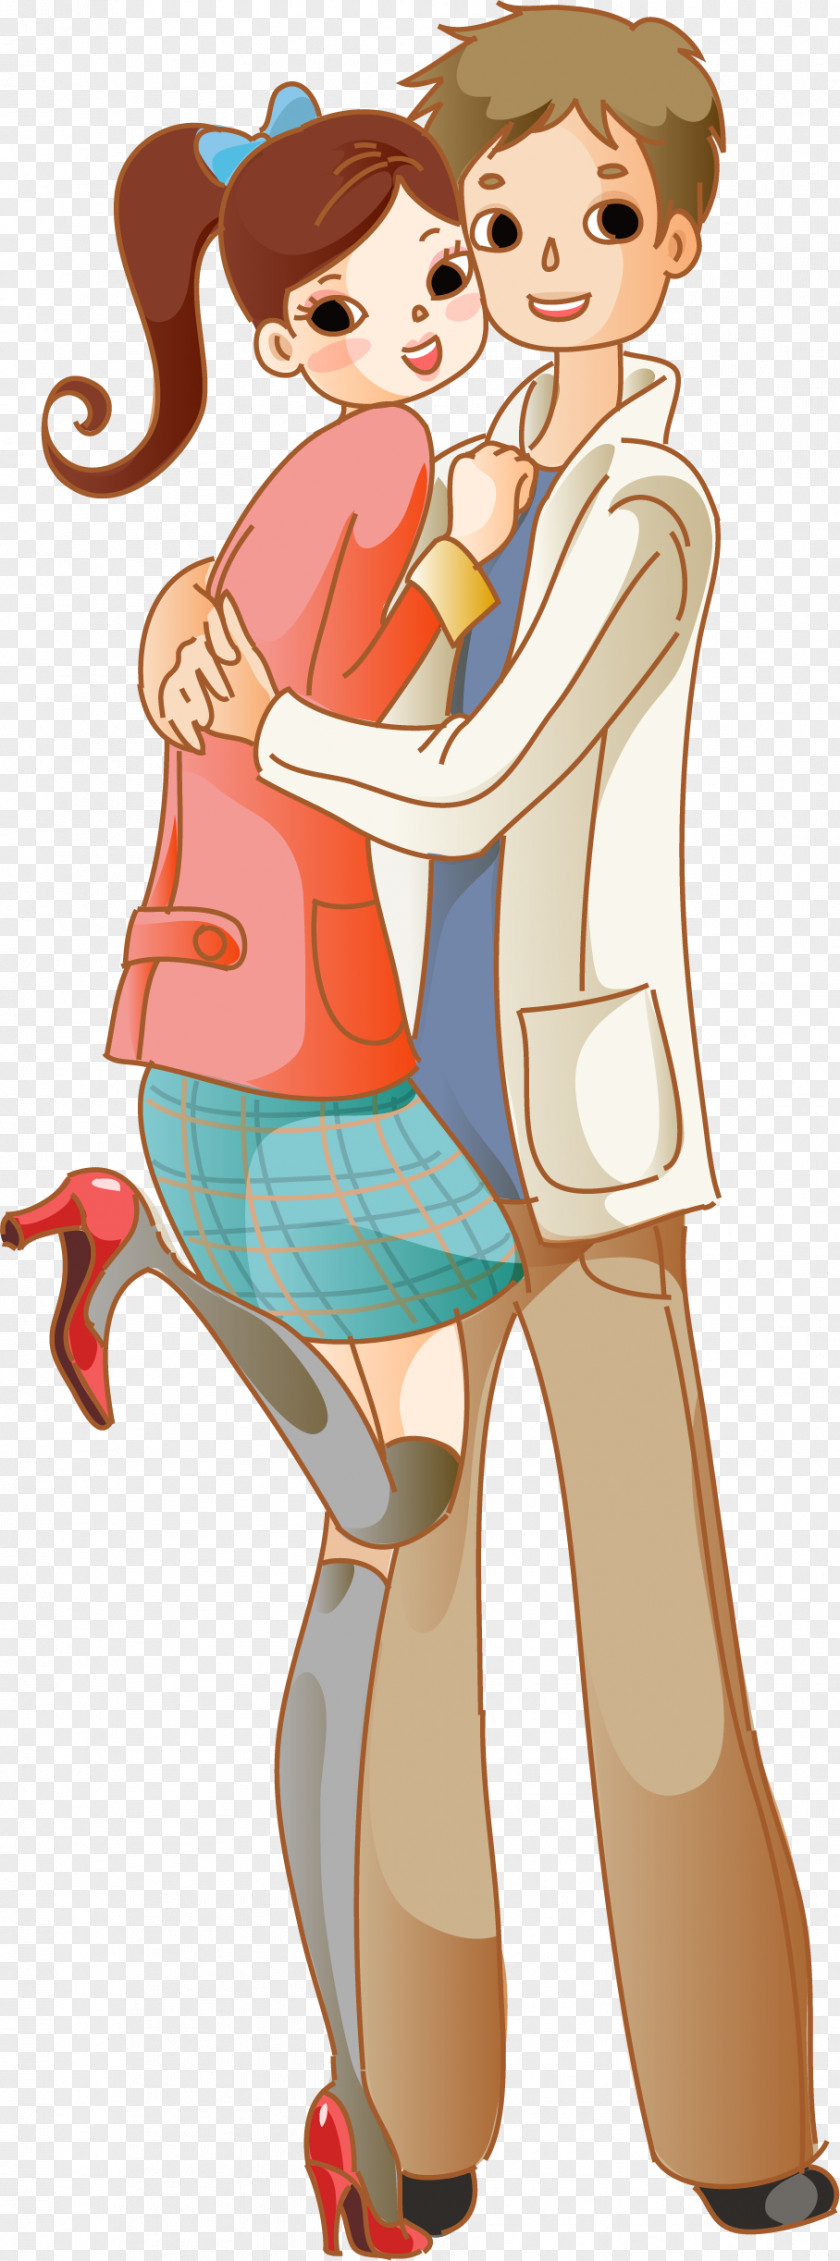 Vector Small Couple Illustration Significant Other Cartoon PNG